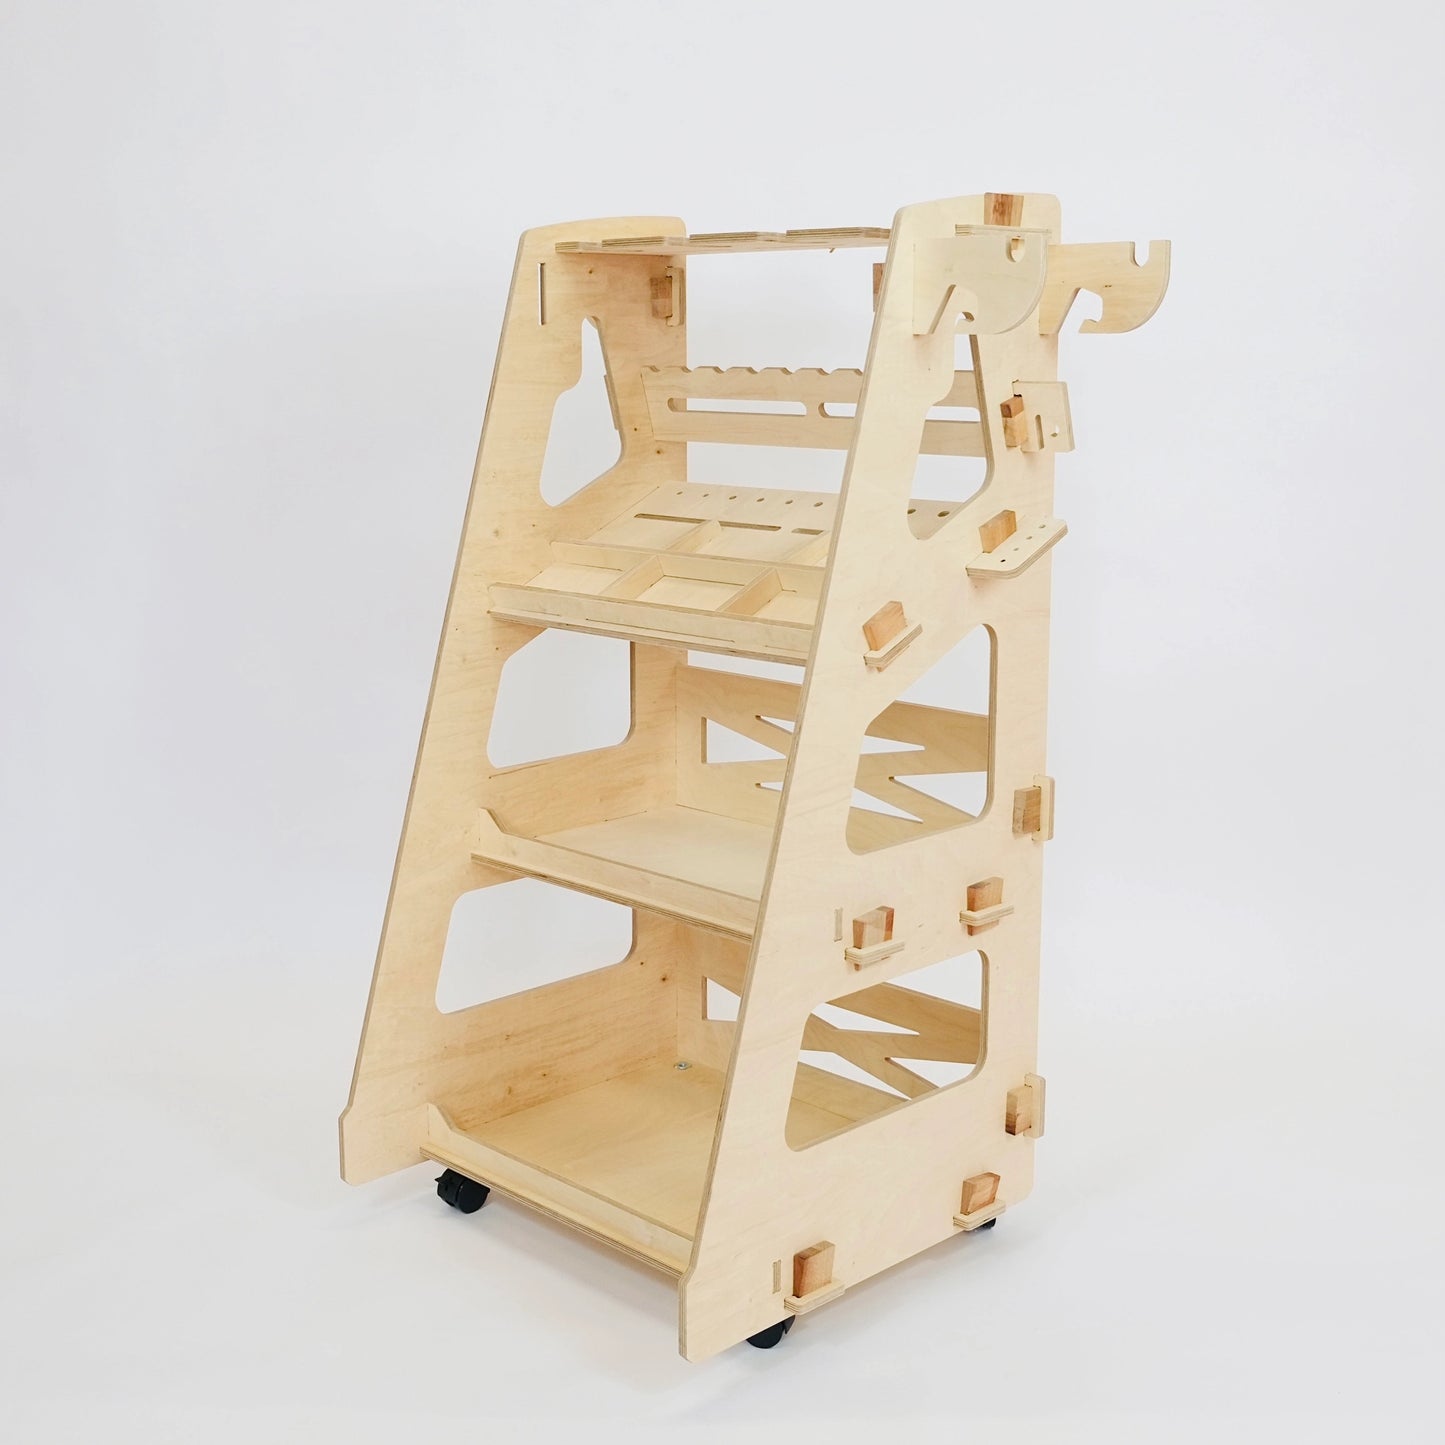 Pale birch plywood tool trolley with 3 slanted shelves, tool storage slots, 4 castors, cut out wood detailing on sides at an angle facing left on a white background.